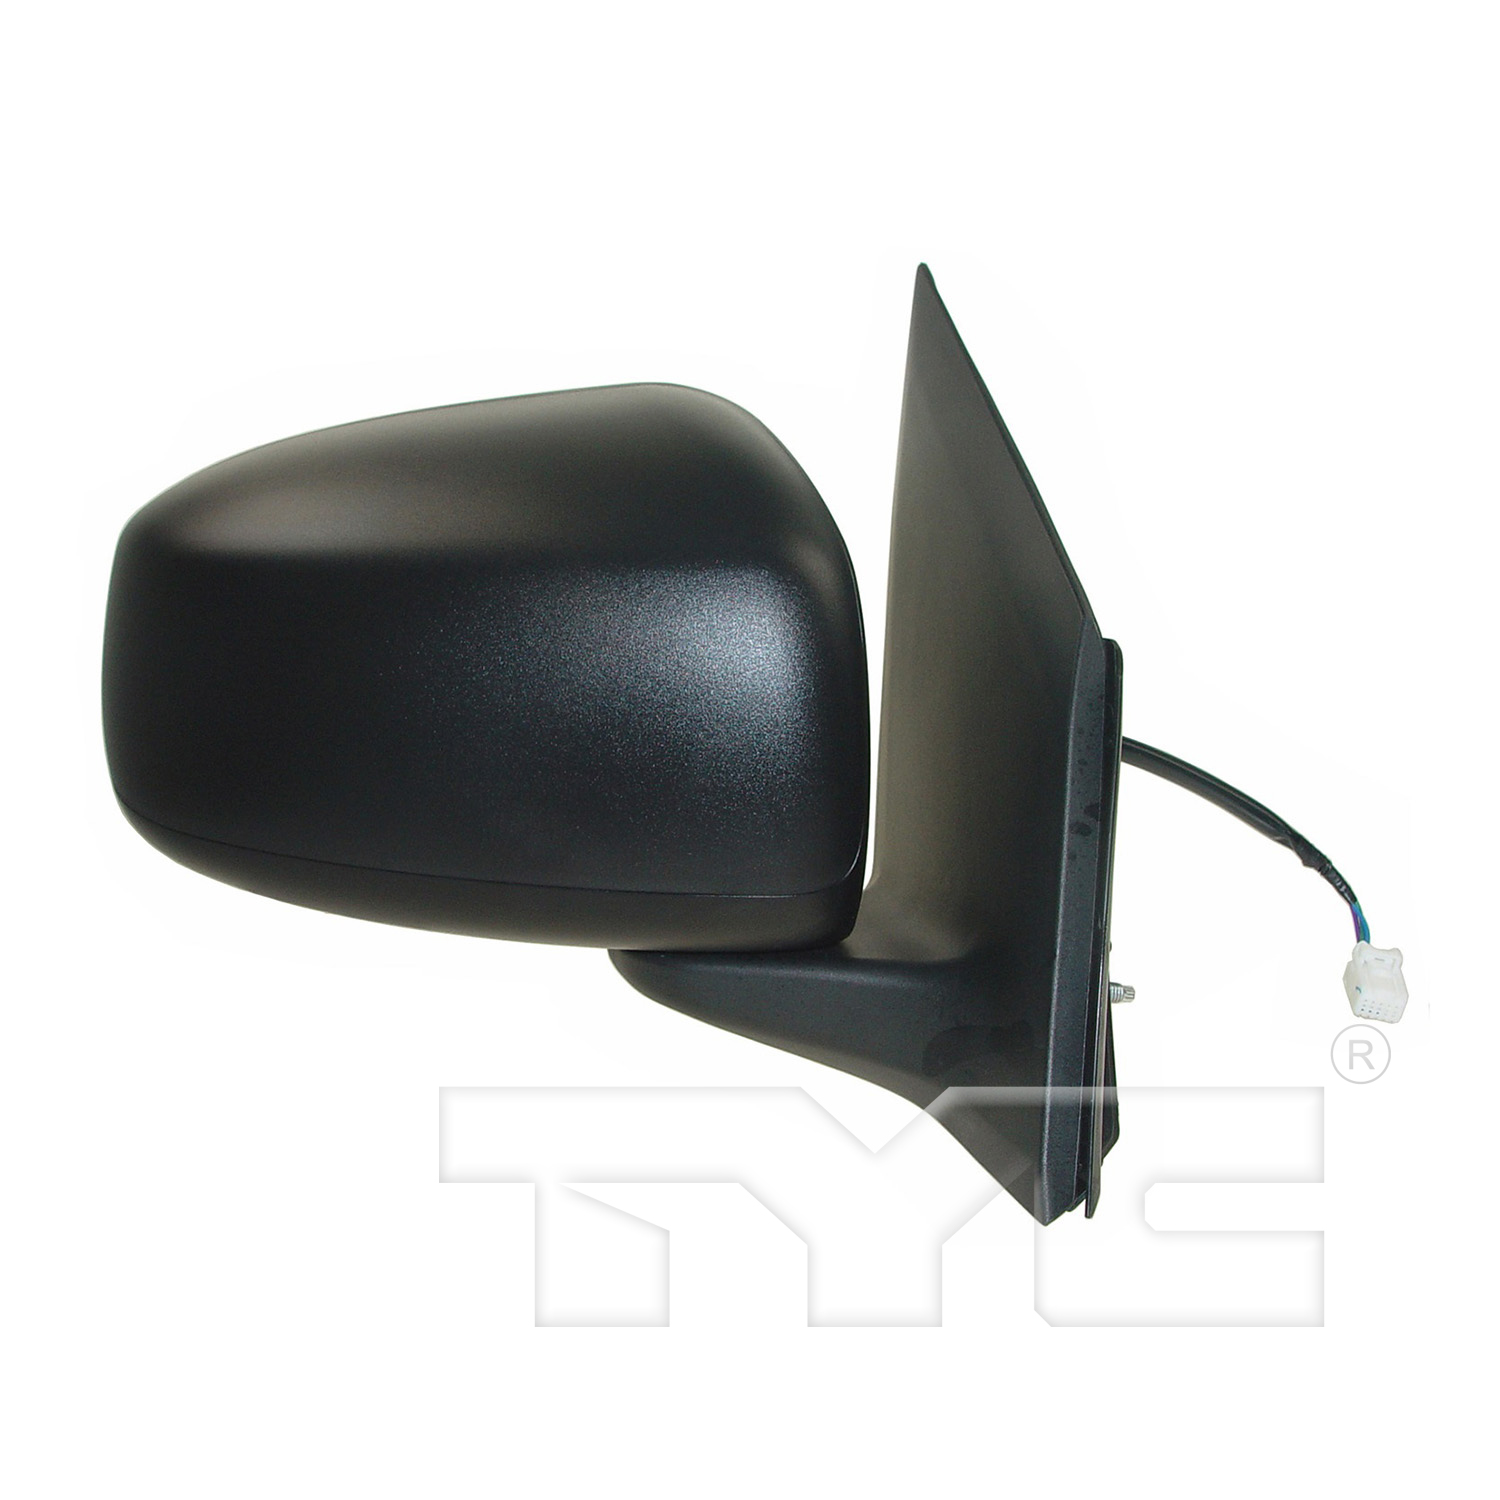 Aftermarket MIRRORS for MITSUBISHI - MIRAGE, MIRAGE,14-22,RT Mirror outside rear view